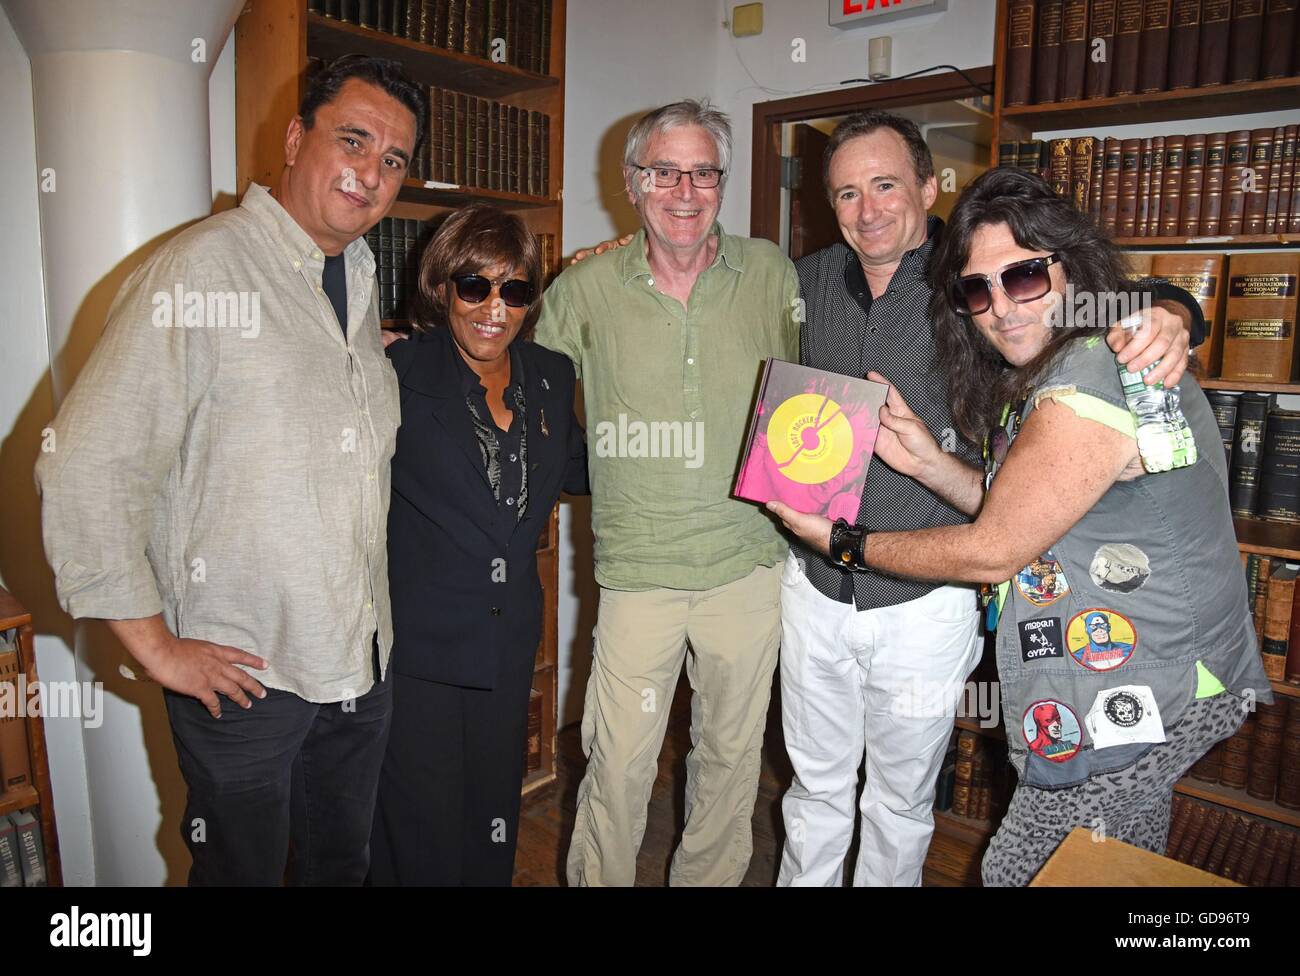 New York, NY, USA. 14th July, 2016. Steven Bush, Gloria Jones, Jake Holmes, Paul Rachman, Tony Mann at in-store appearance for The Lost Rockers: Broken Dreams and Crashed Careers Book Release Event, Strand Bookstore, New York, NY July 14, 2016. Credit:  Derek Storm/Everett Collection/Alamy Live News Stock Photo